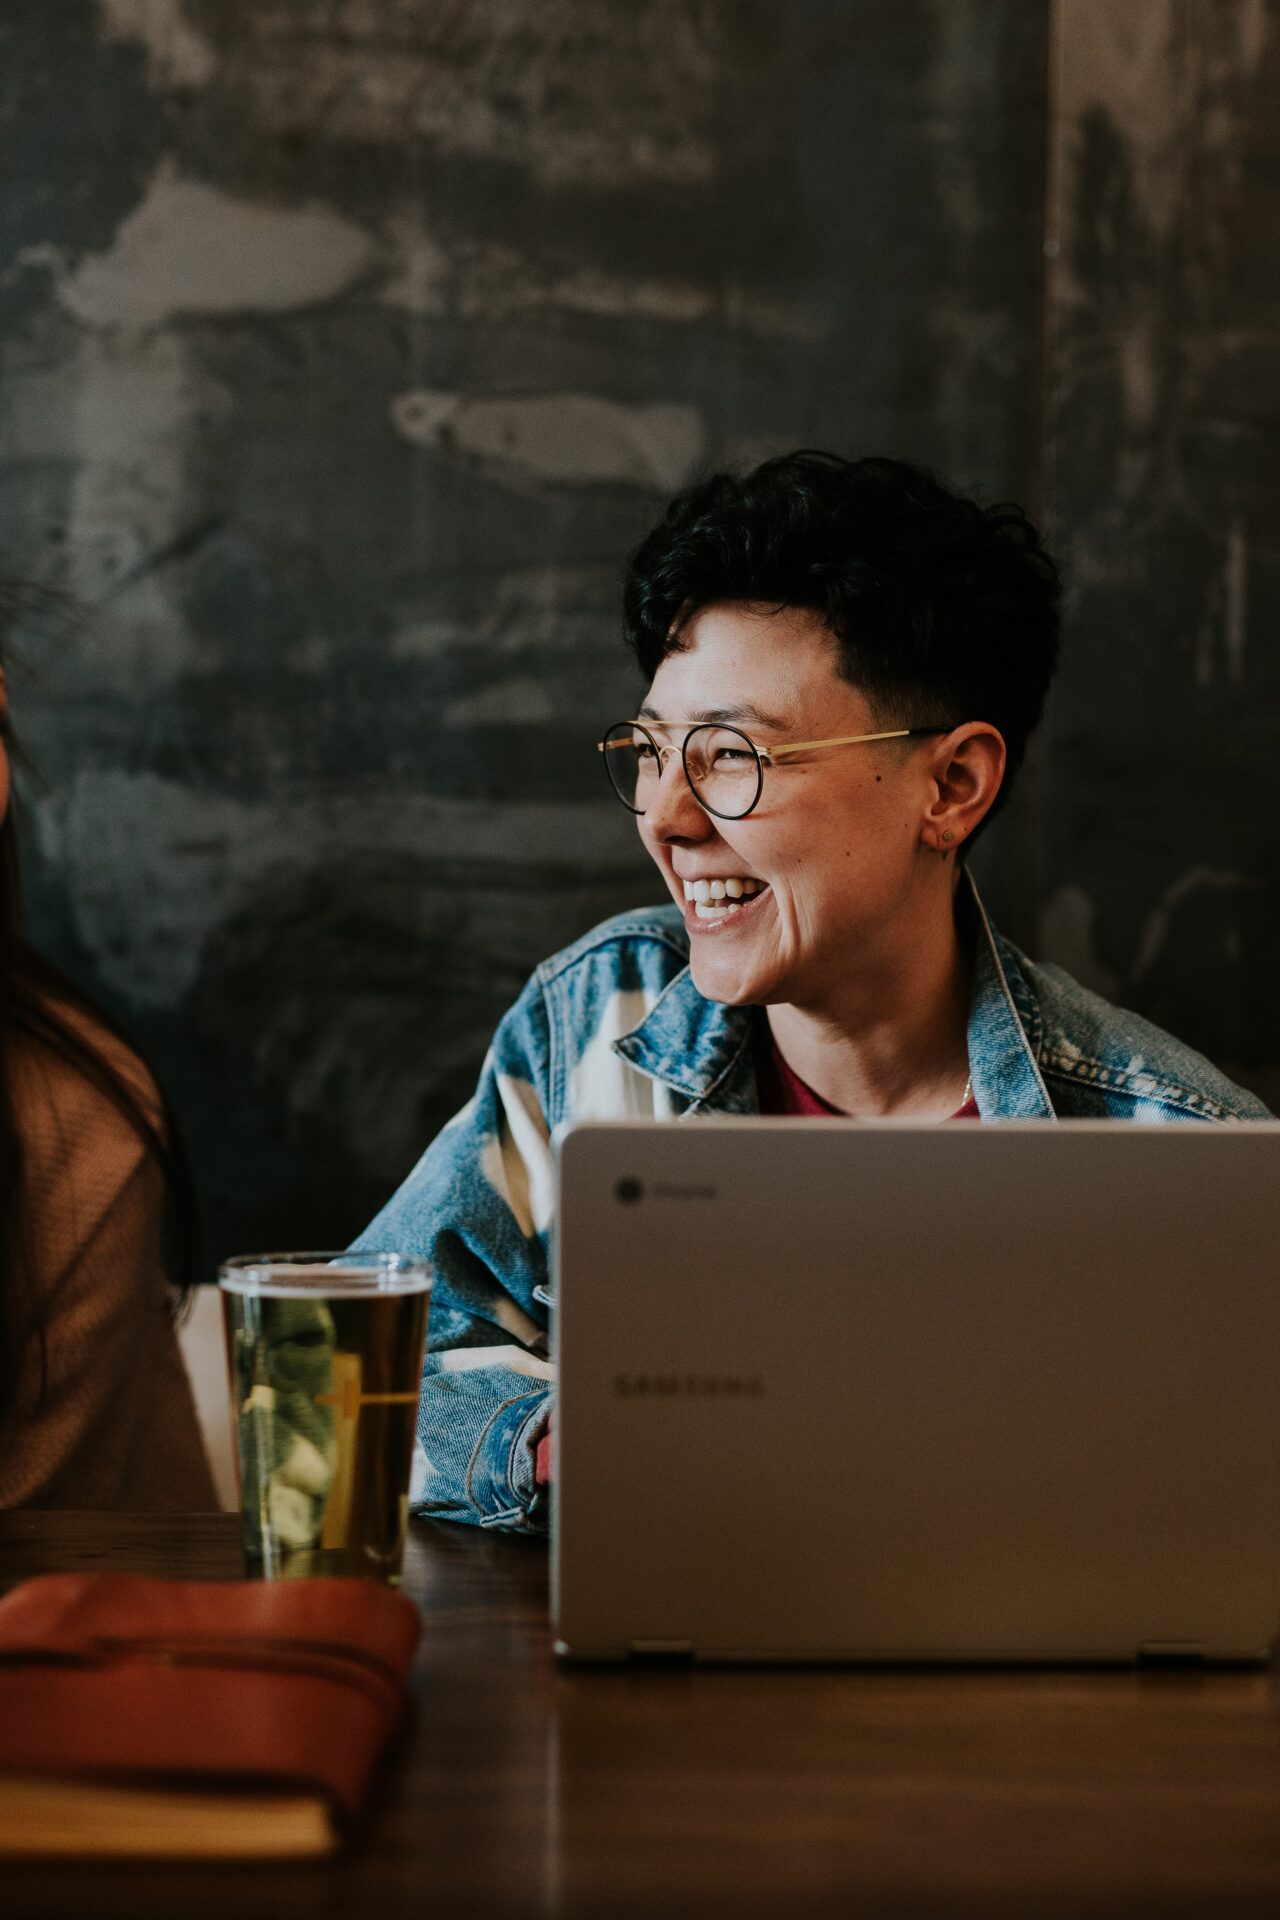 Person with glasses smiling with a drink and a laptop (Photo by Brooke Cagle on Unsplash)